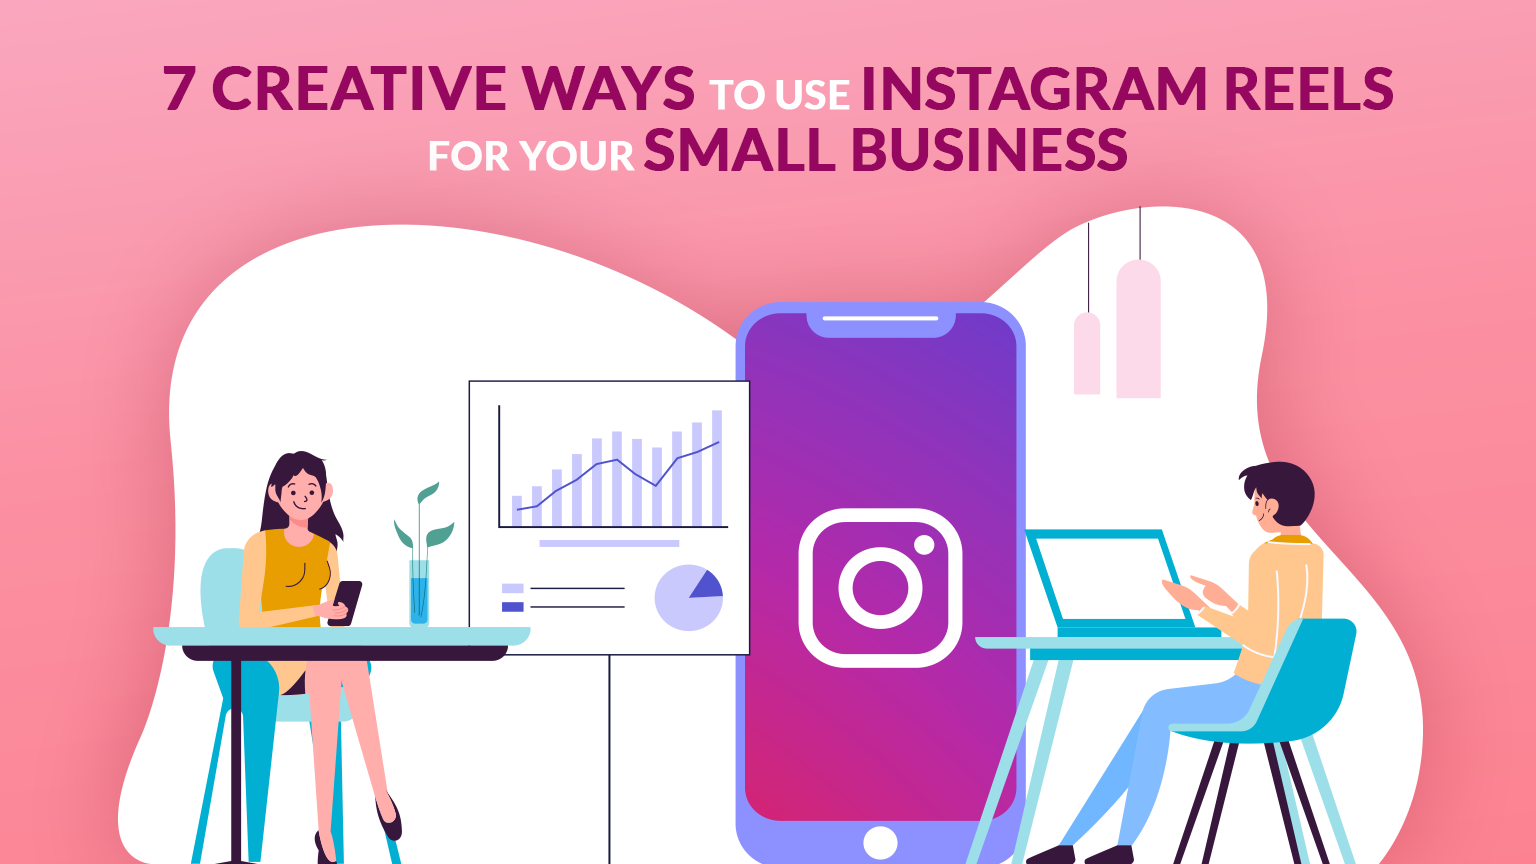 7 Creative Ways to use Instagram Reels for Your Small Business by Publer